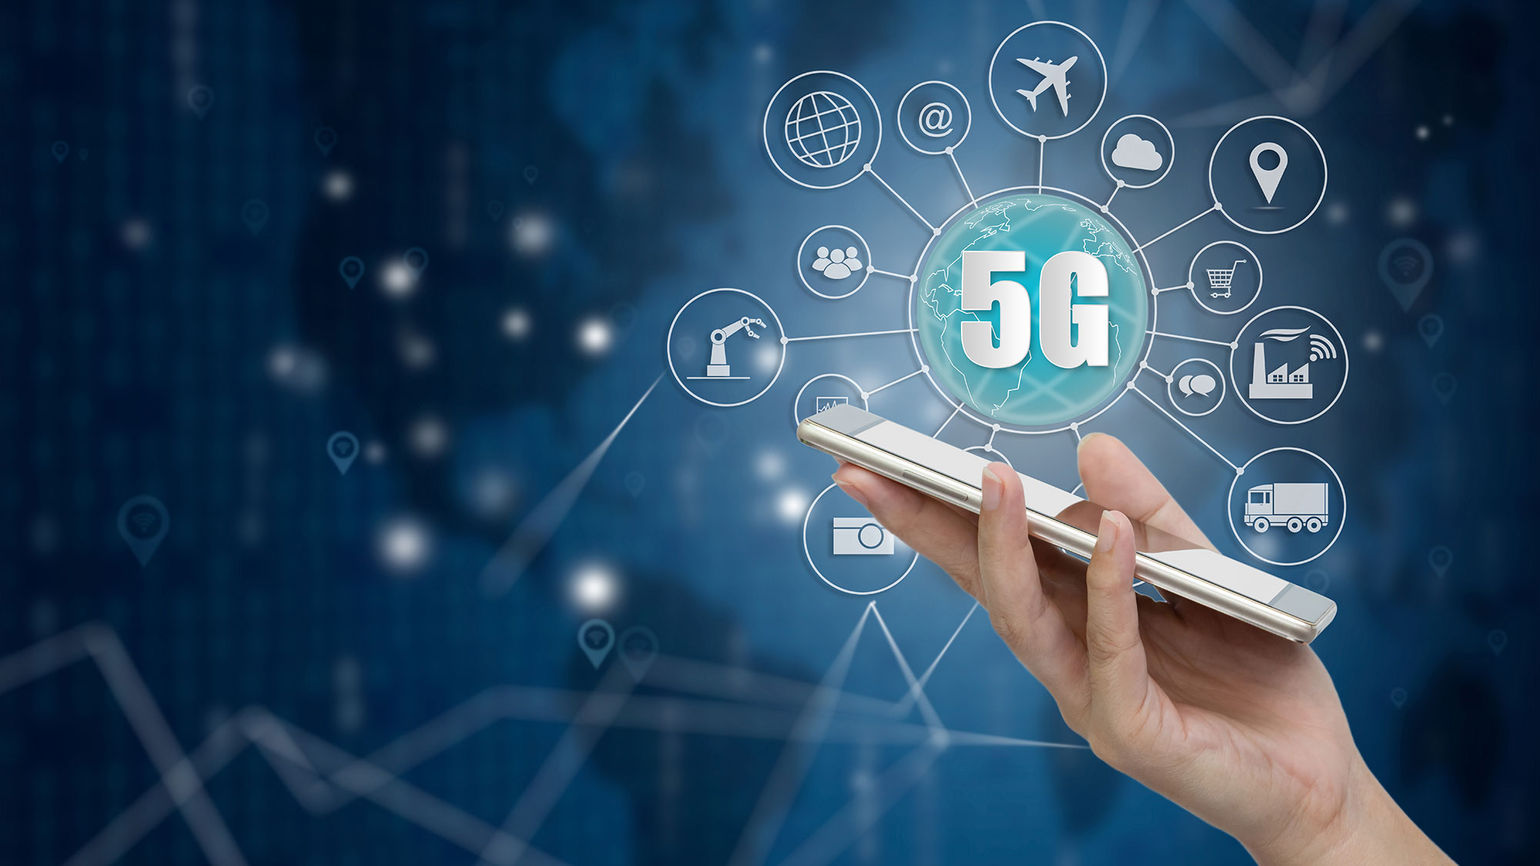 FAA issues aircraft landing restrictions due to the risk of 5G